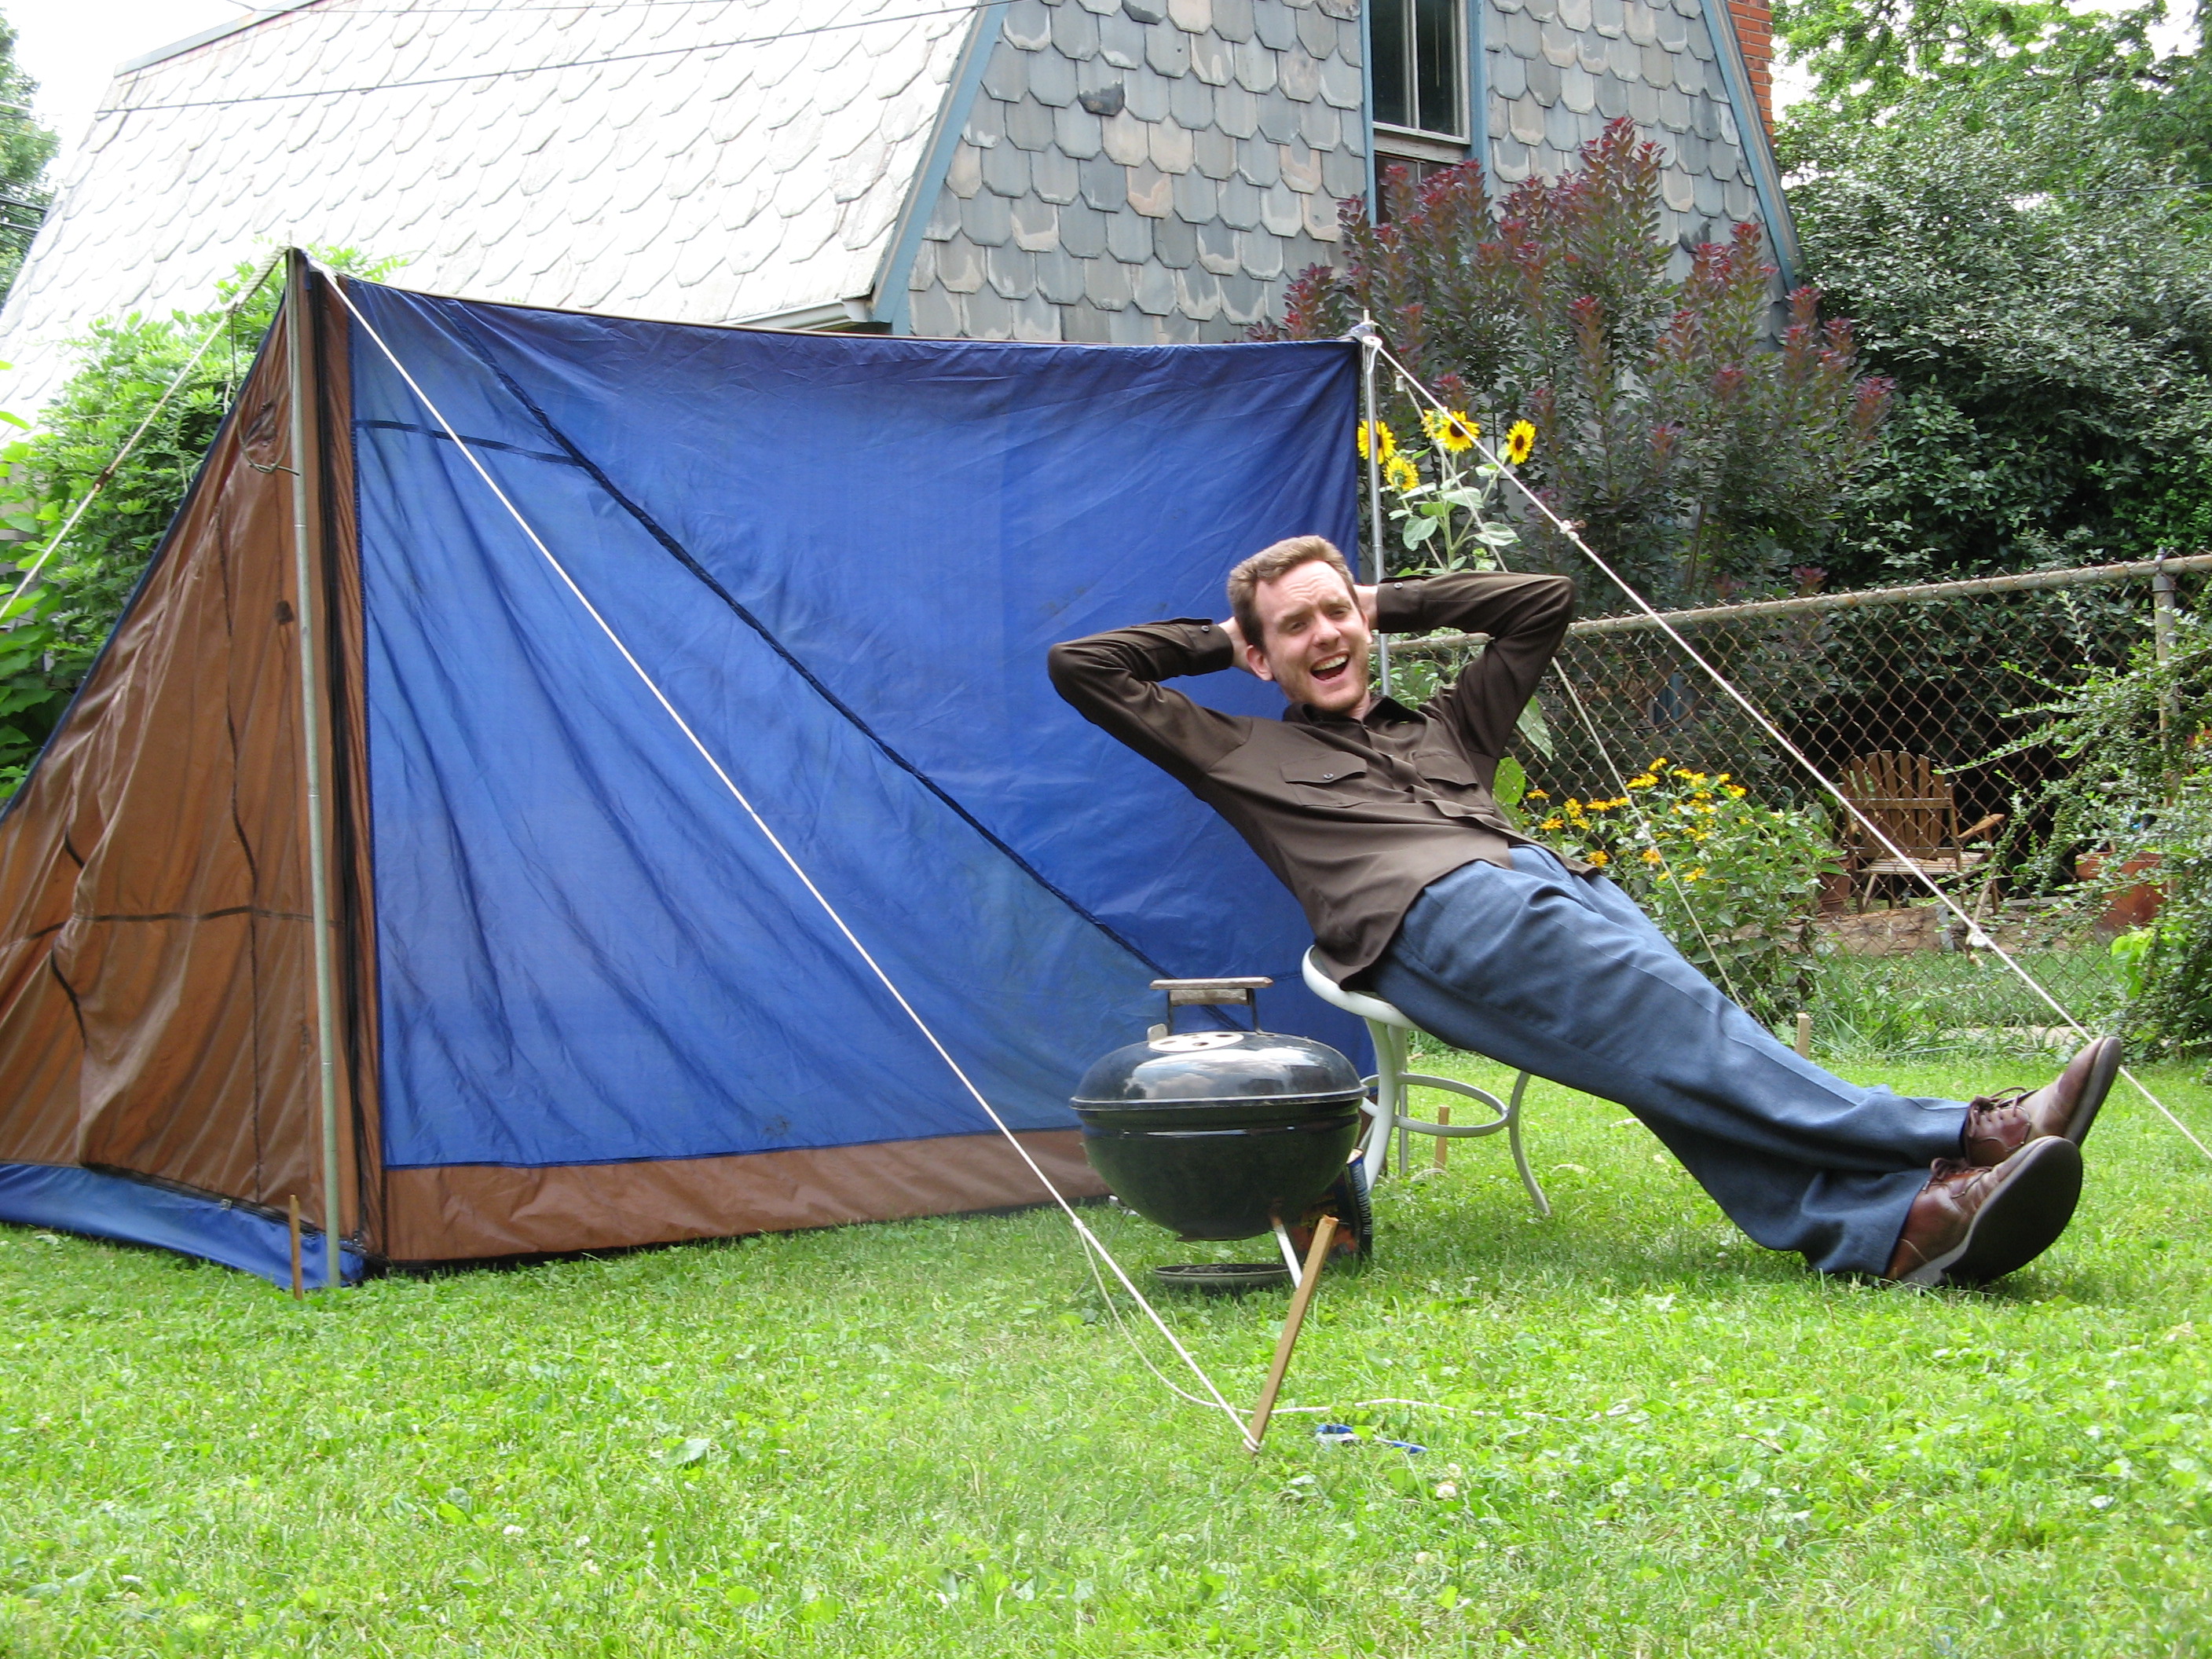 The Near-Perfect Tent: Design and Build a Recycled Tent